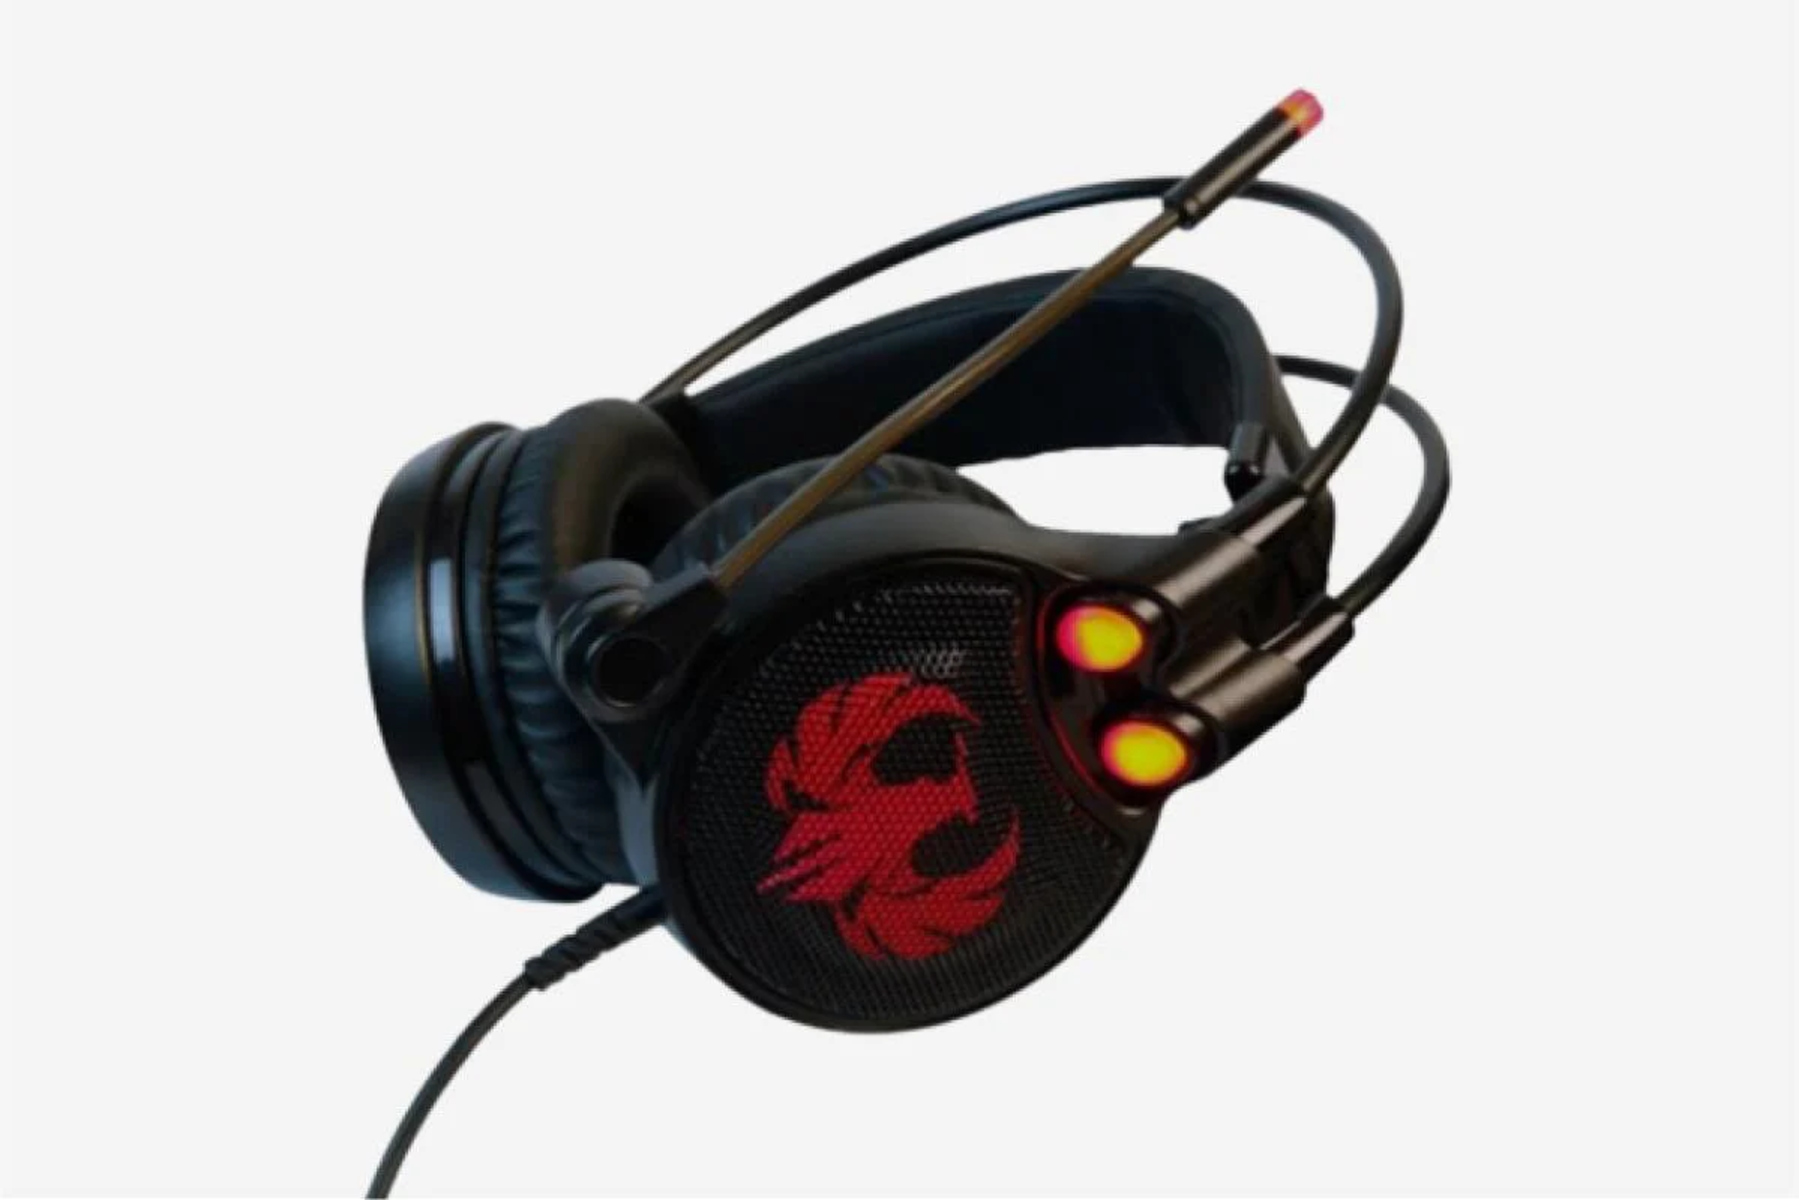 which-sades-gaming-headset-has-the-best-microphone-and-audio-quality